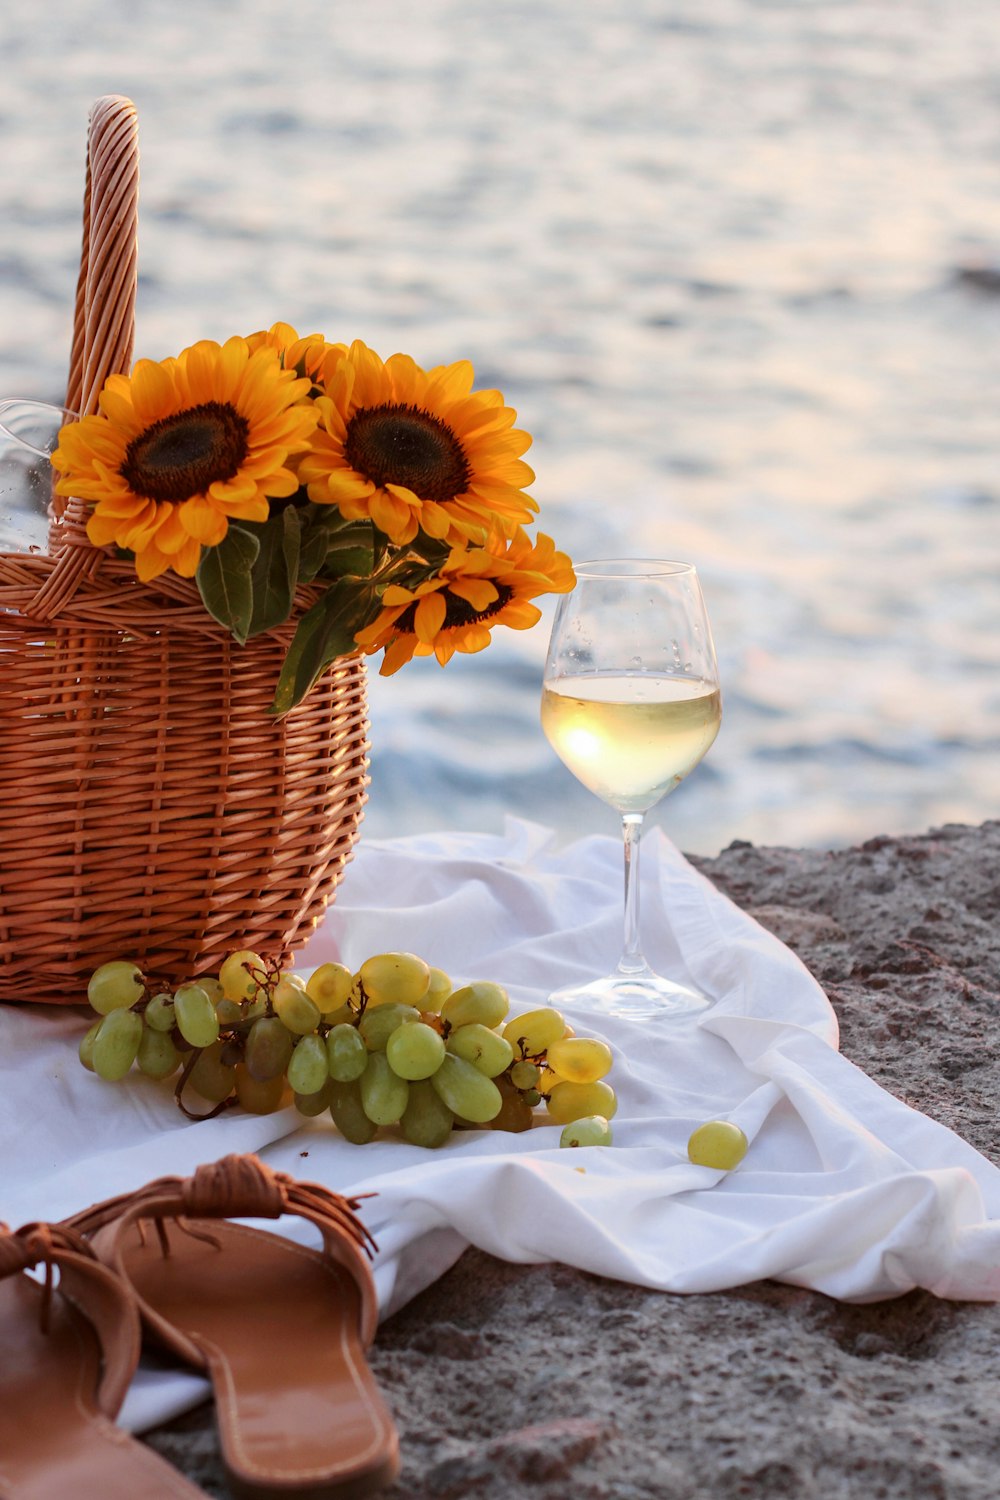 yellow sunflower in brown woven basket beside clear wine glass on white textile